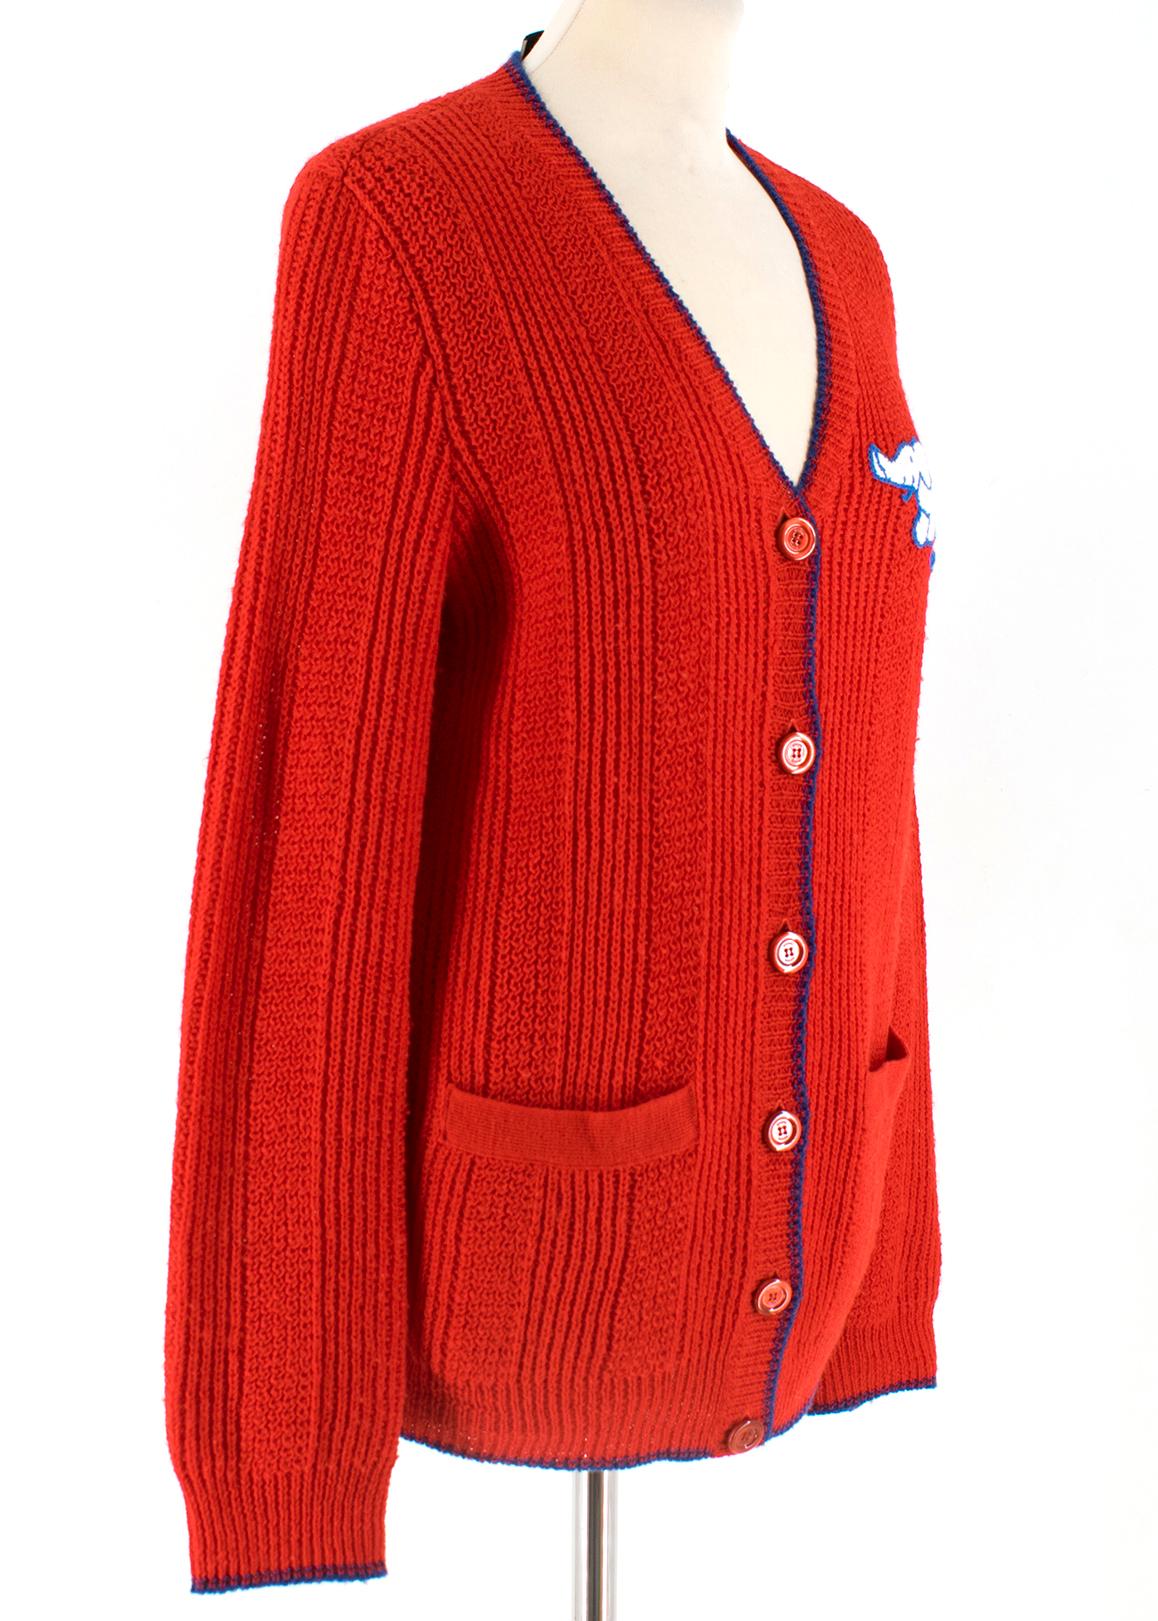 Gucci Women's Red Elephant Patch Cardigan. RRP £1200

-Long sleeve knit wool cardigan in bright red 
- Rib knit blue Y-neck collar, cuffs, and hem
- Embroidered elephant and logo in white and blue at the chest
- Button closure at front
- Patch